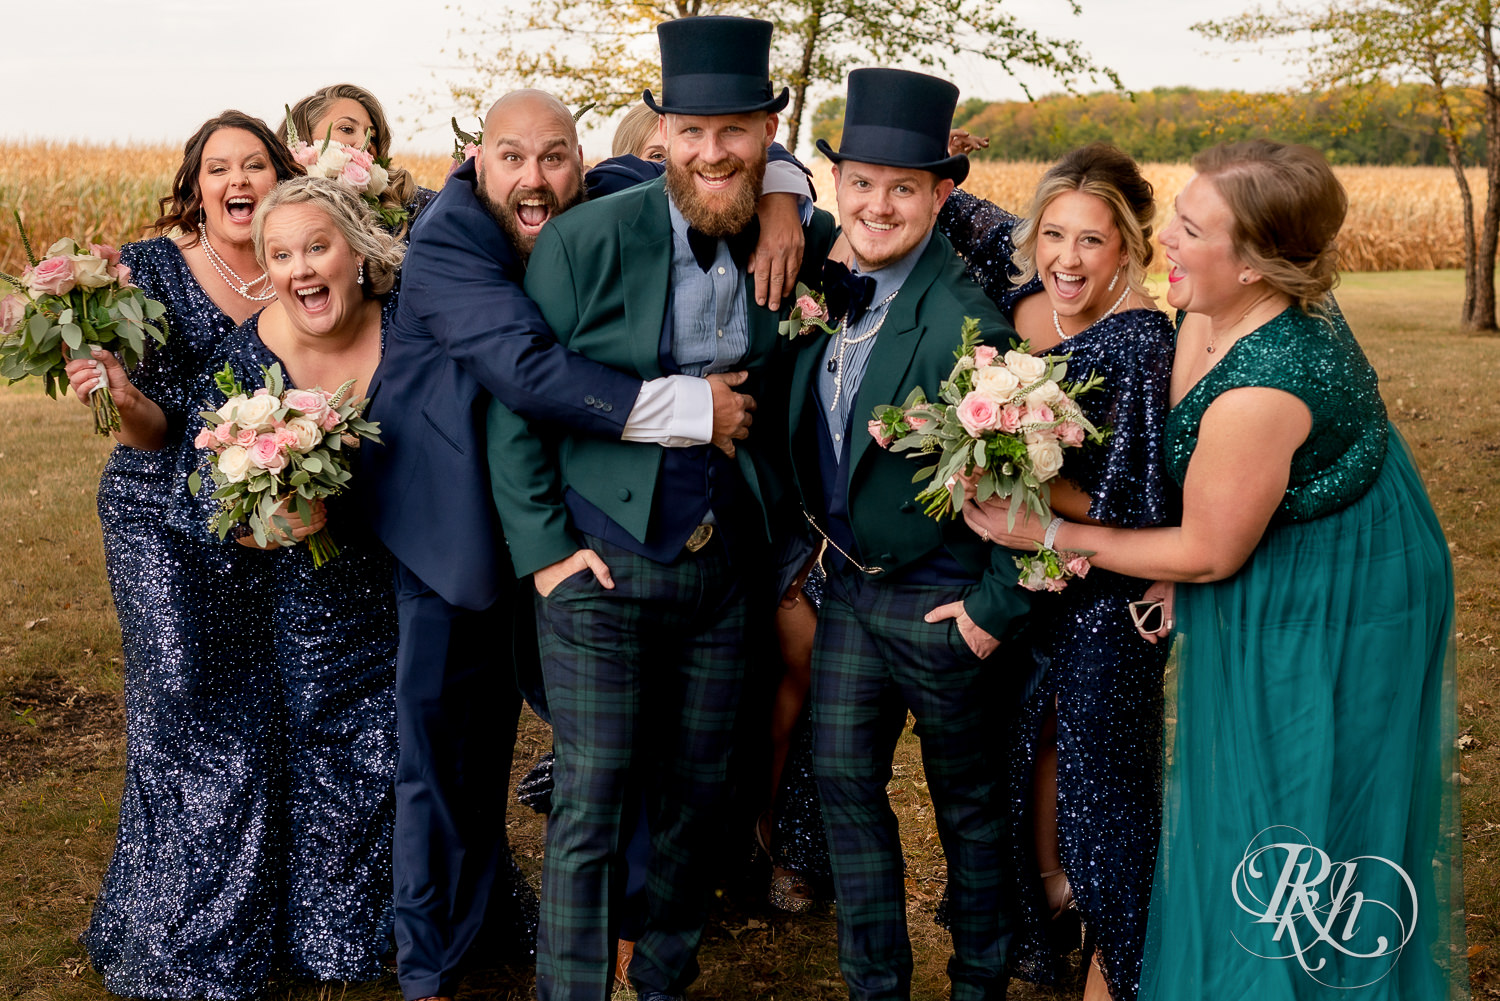 Gay wedding party with grooms wearing top hats and bridesmaids wearing sequin dresses.